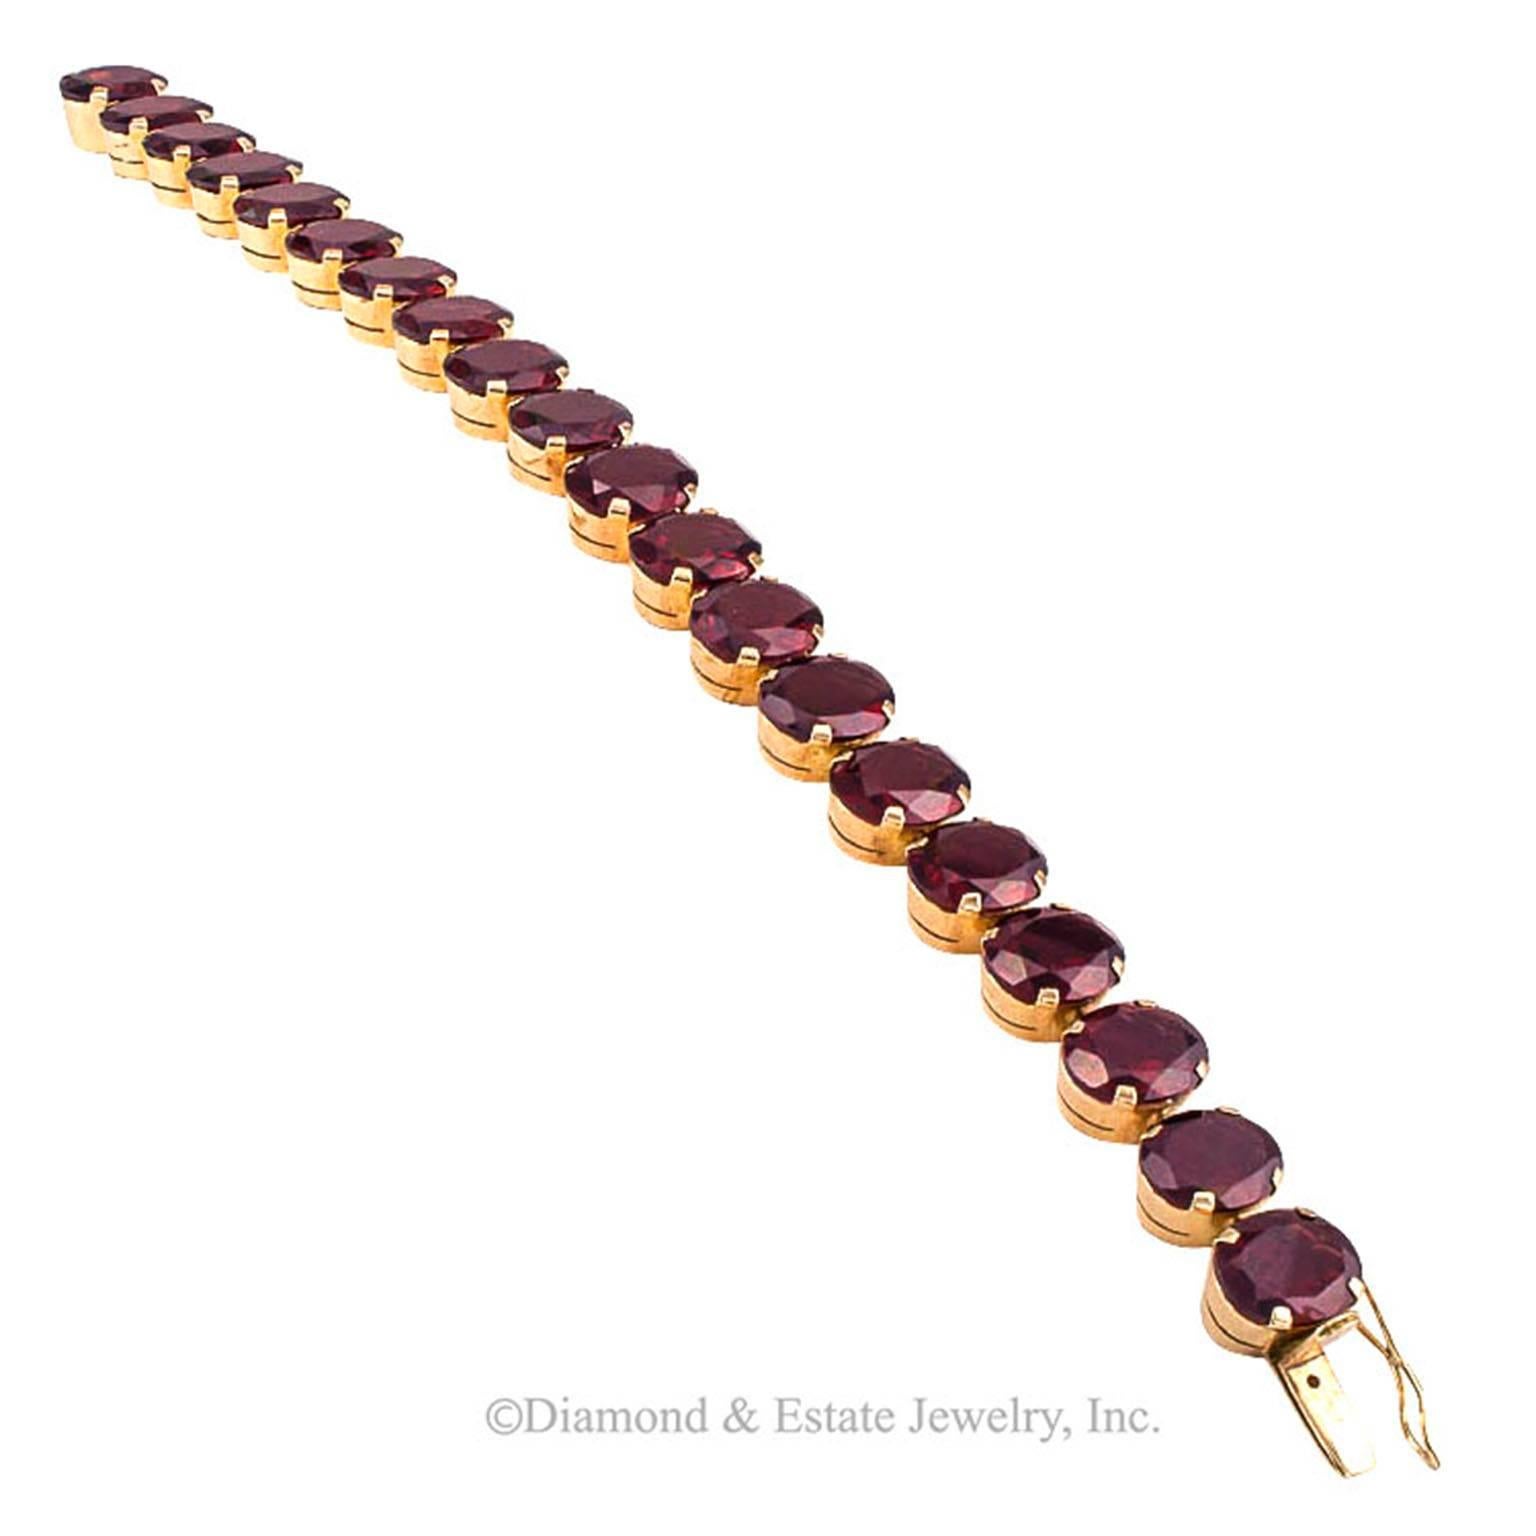 1940's Retro Garnet Line Bracelet

No ordinary garnet line bracelet.  Twenty good-size faceted oval garnets radiating with deep burgundy wine color... the way old garnets used to look... seventy-five carats approximately  total weight.  Mounted in